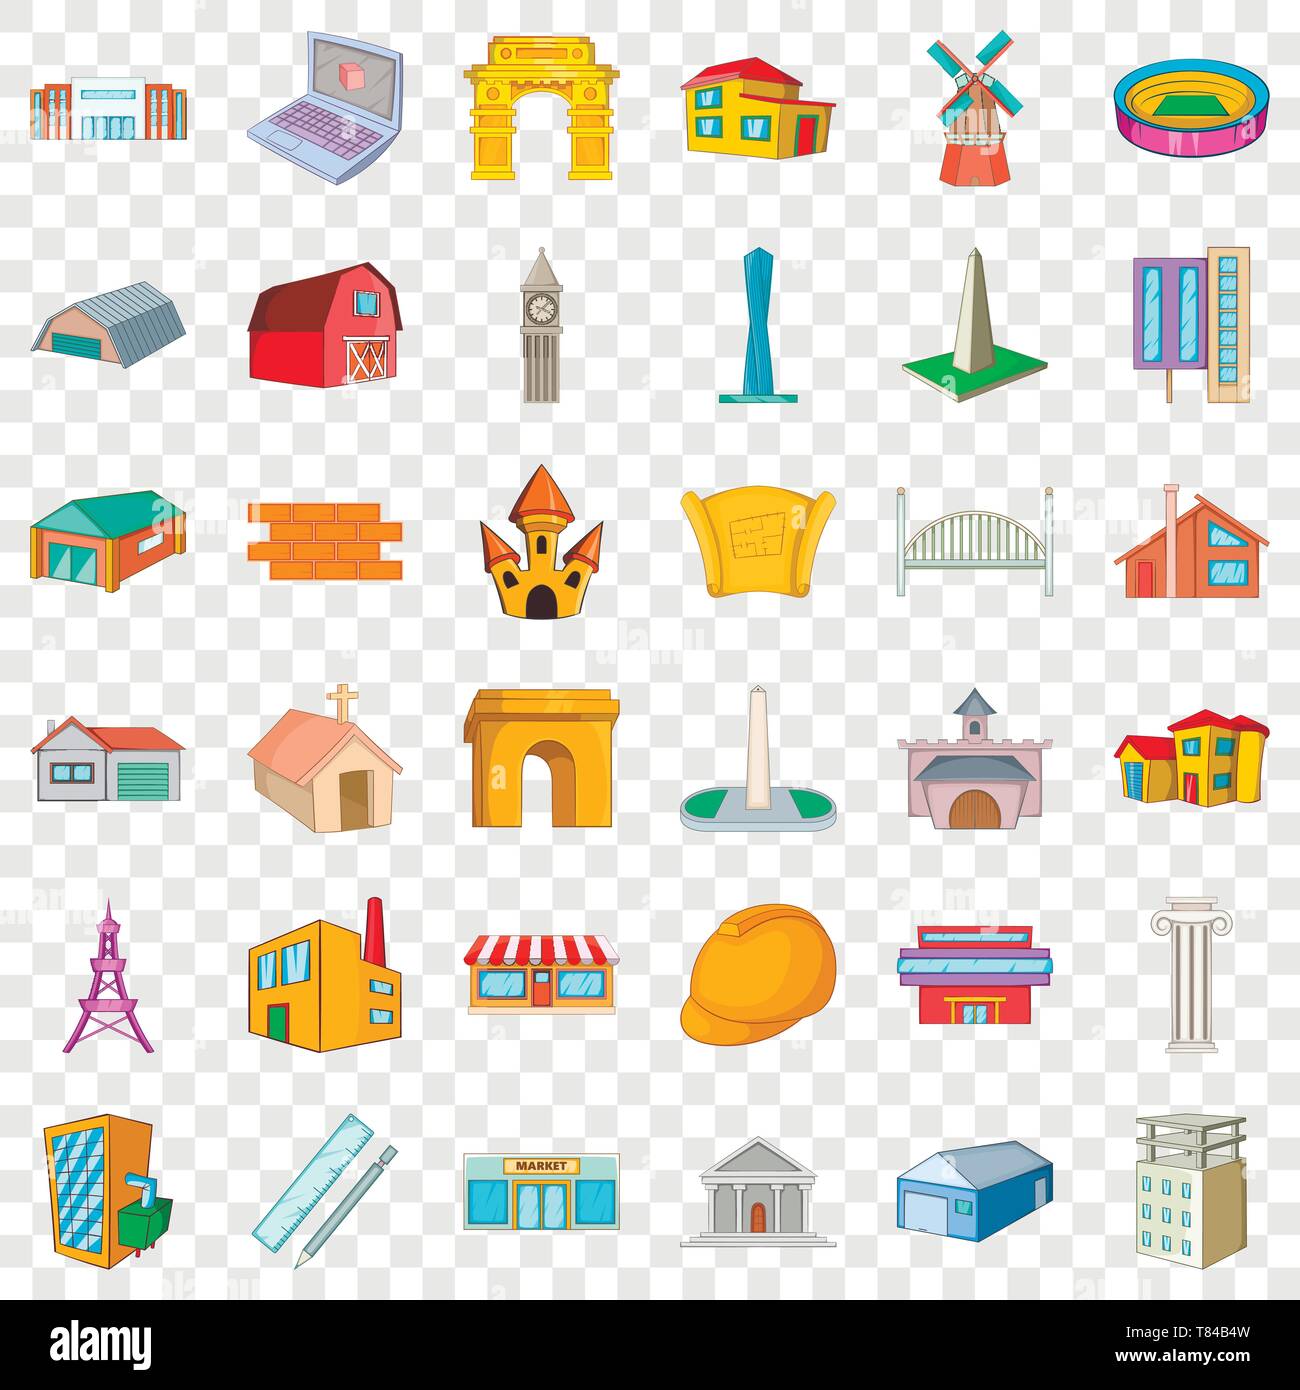 Architect wood ruler icon cartoon project Vector Image